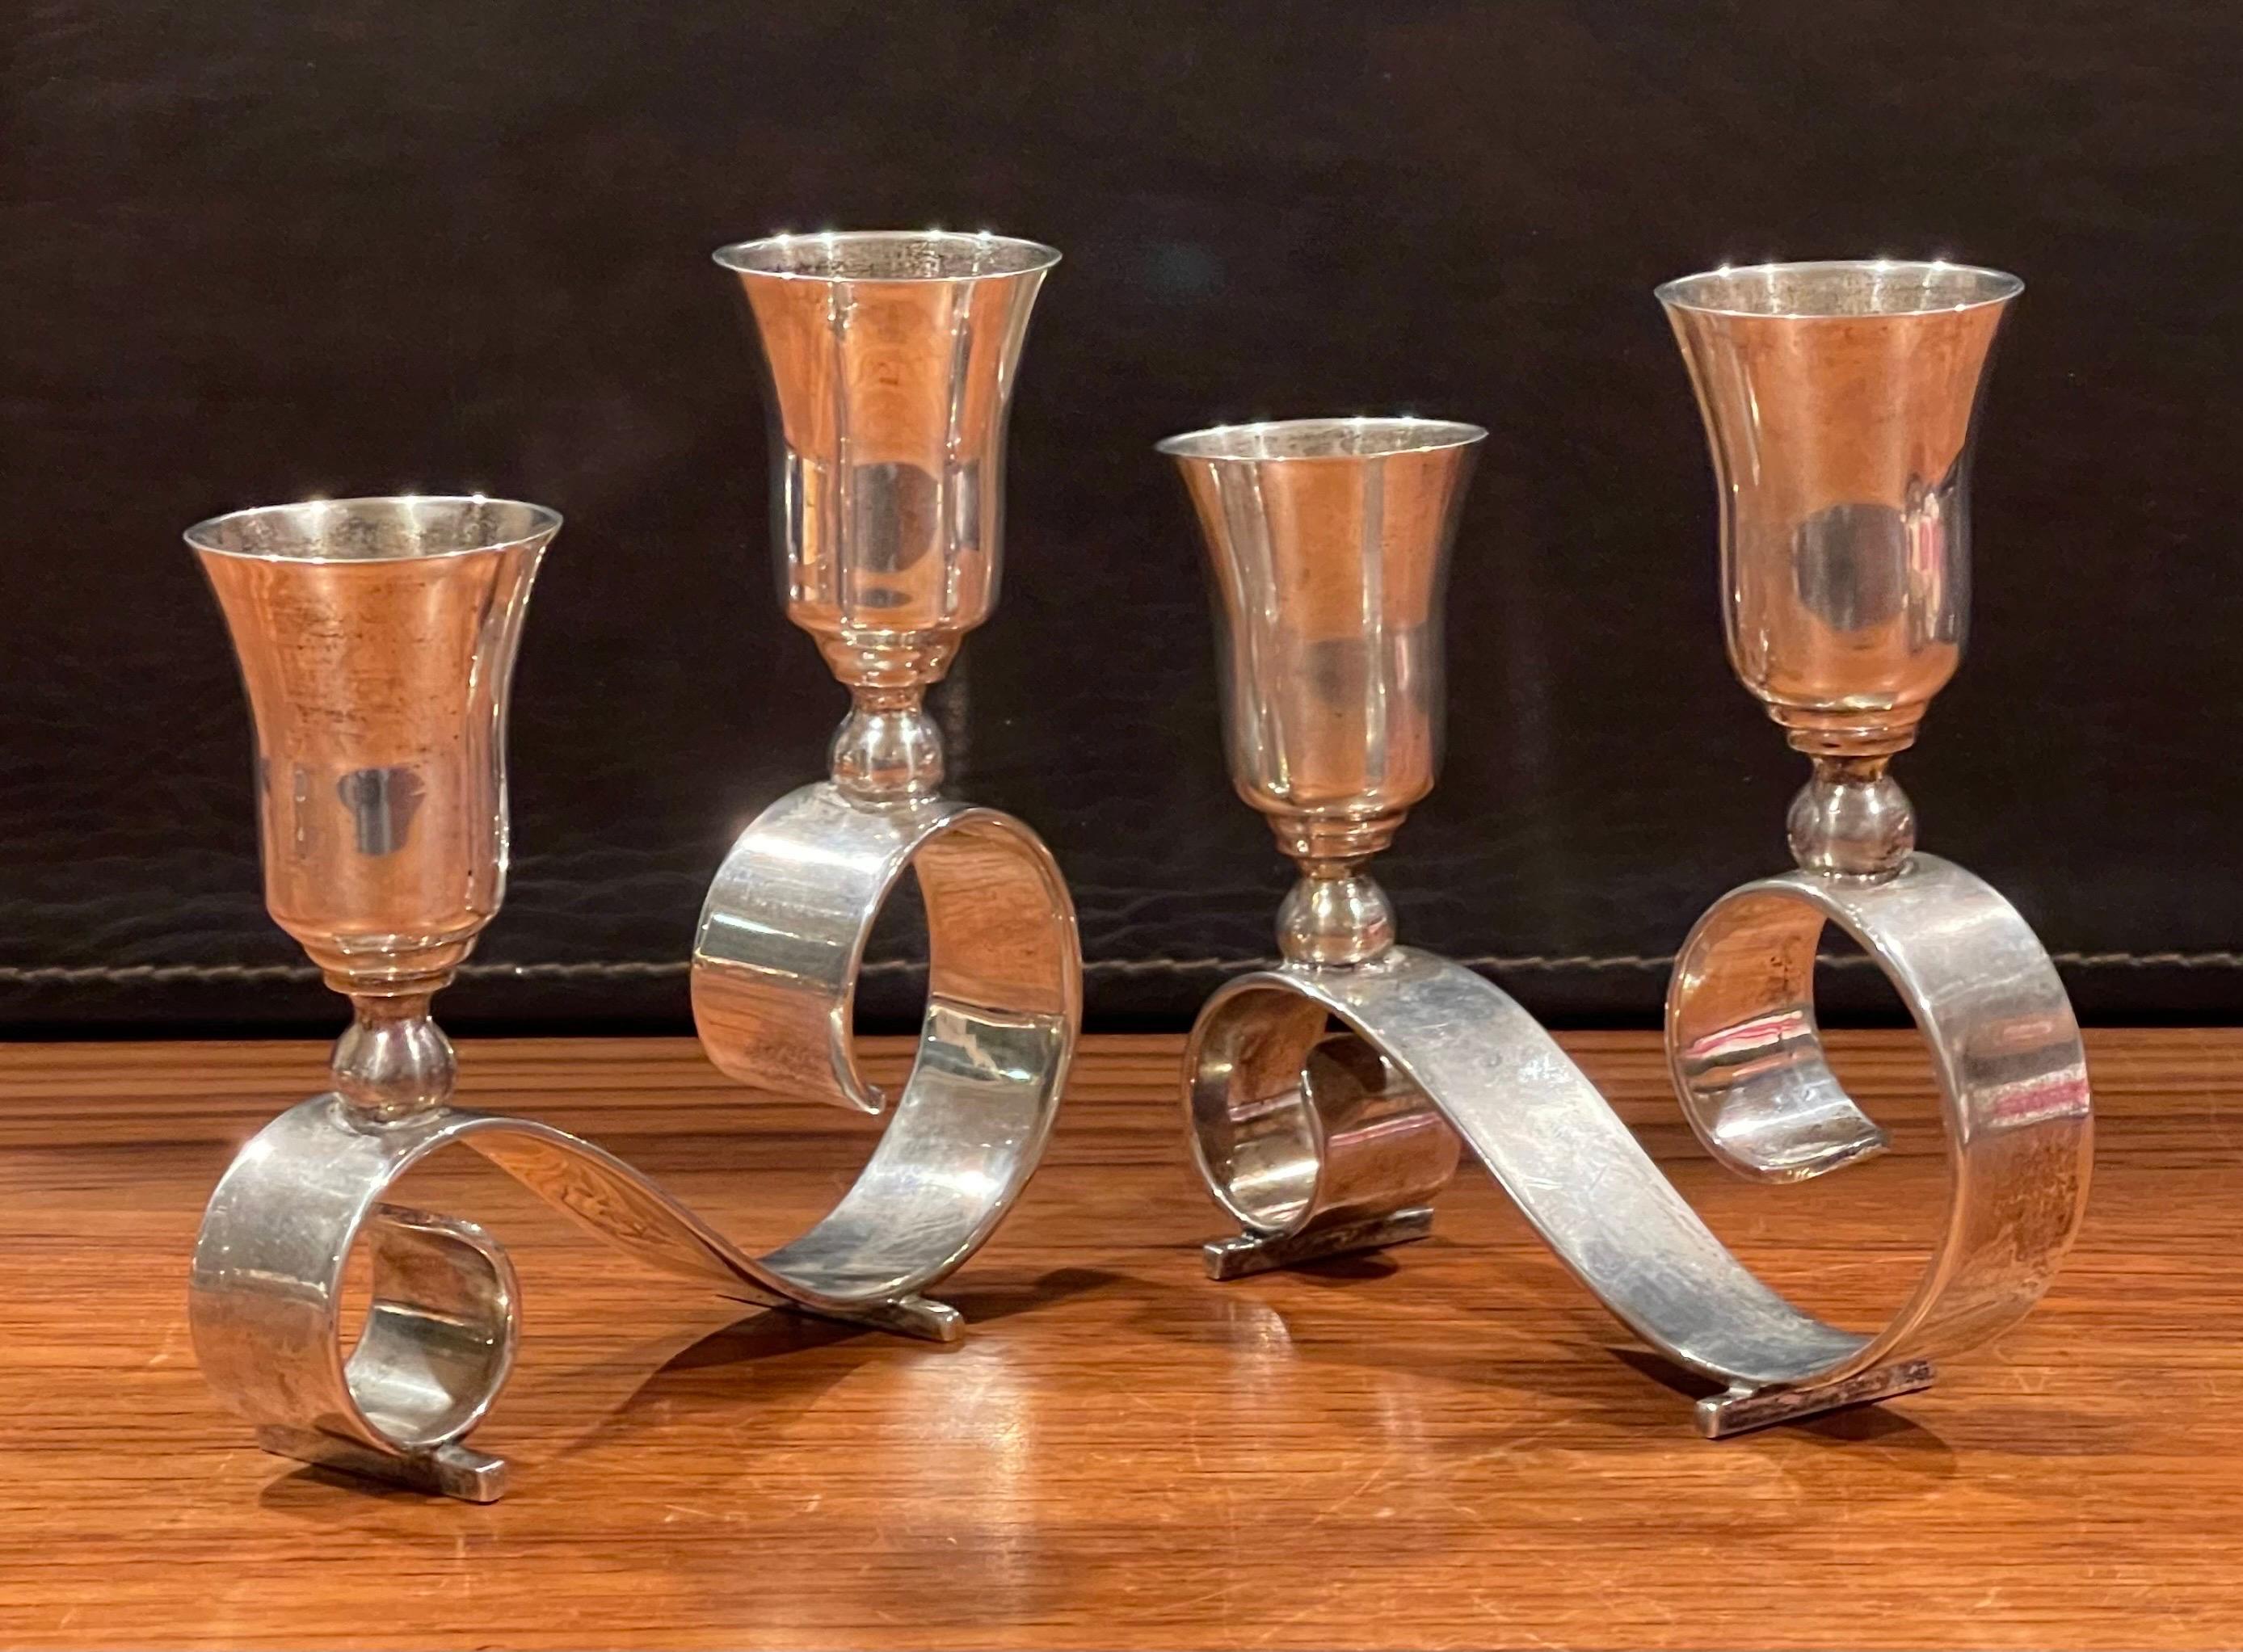 Pair of MCM Modernist Sterling Silver Candleholders by Juvento Lopez Reyes In Good Condition For Sale In San Diego, CA